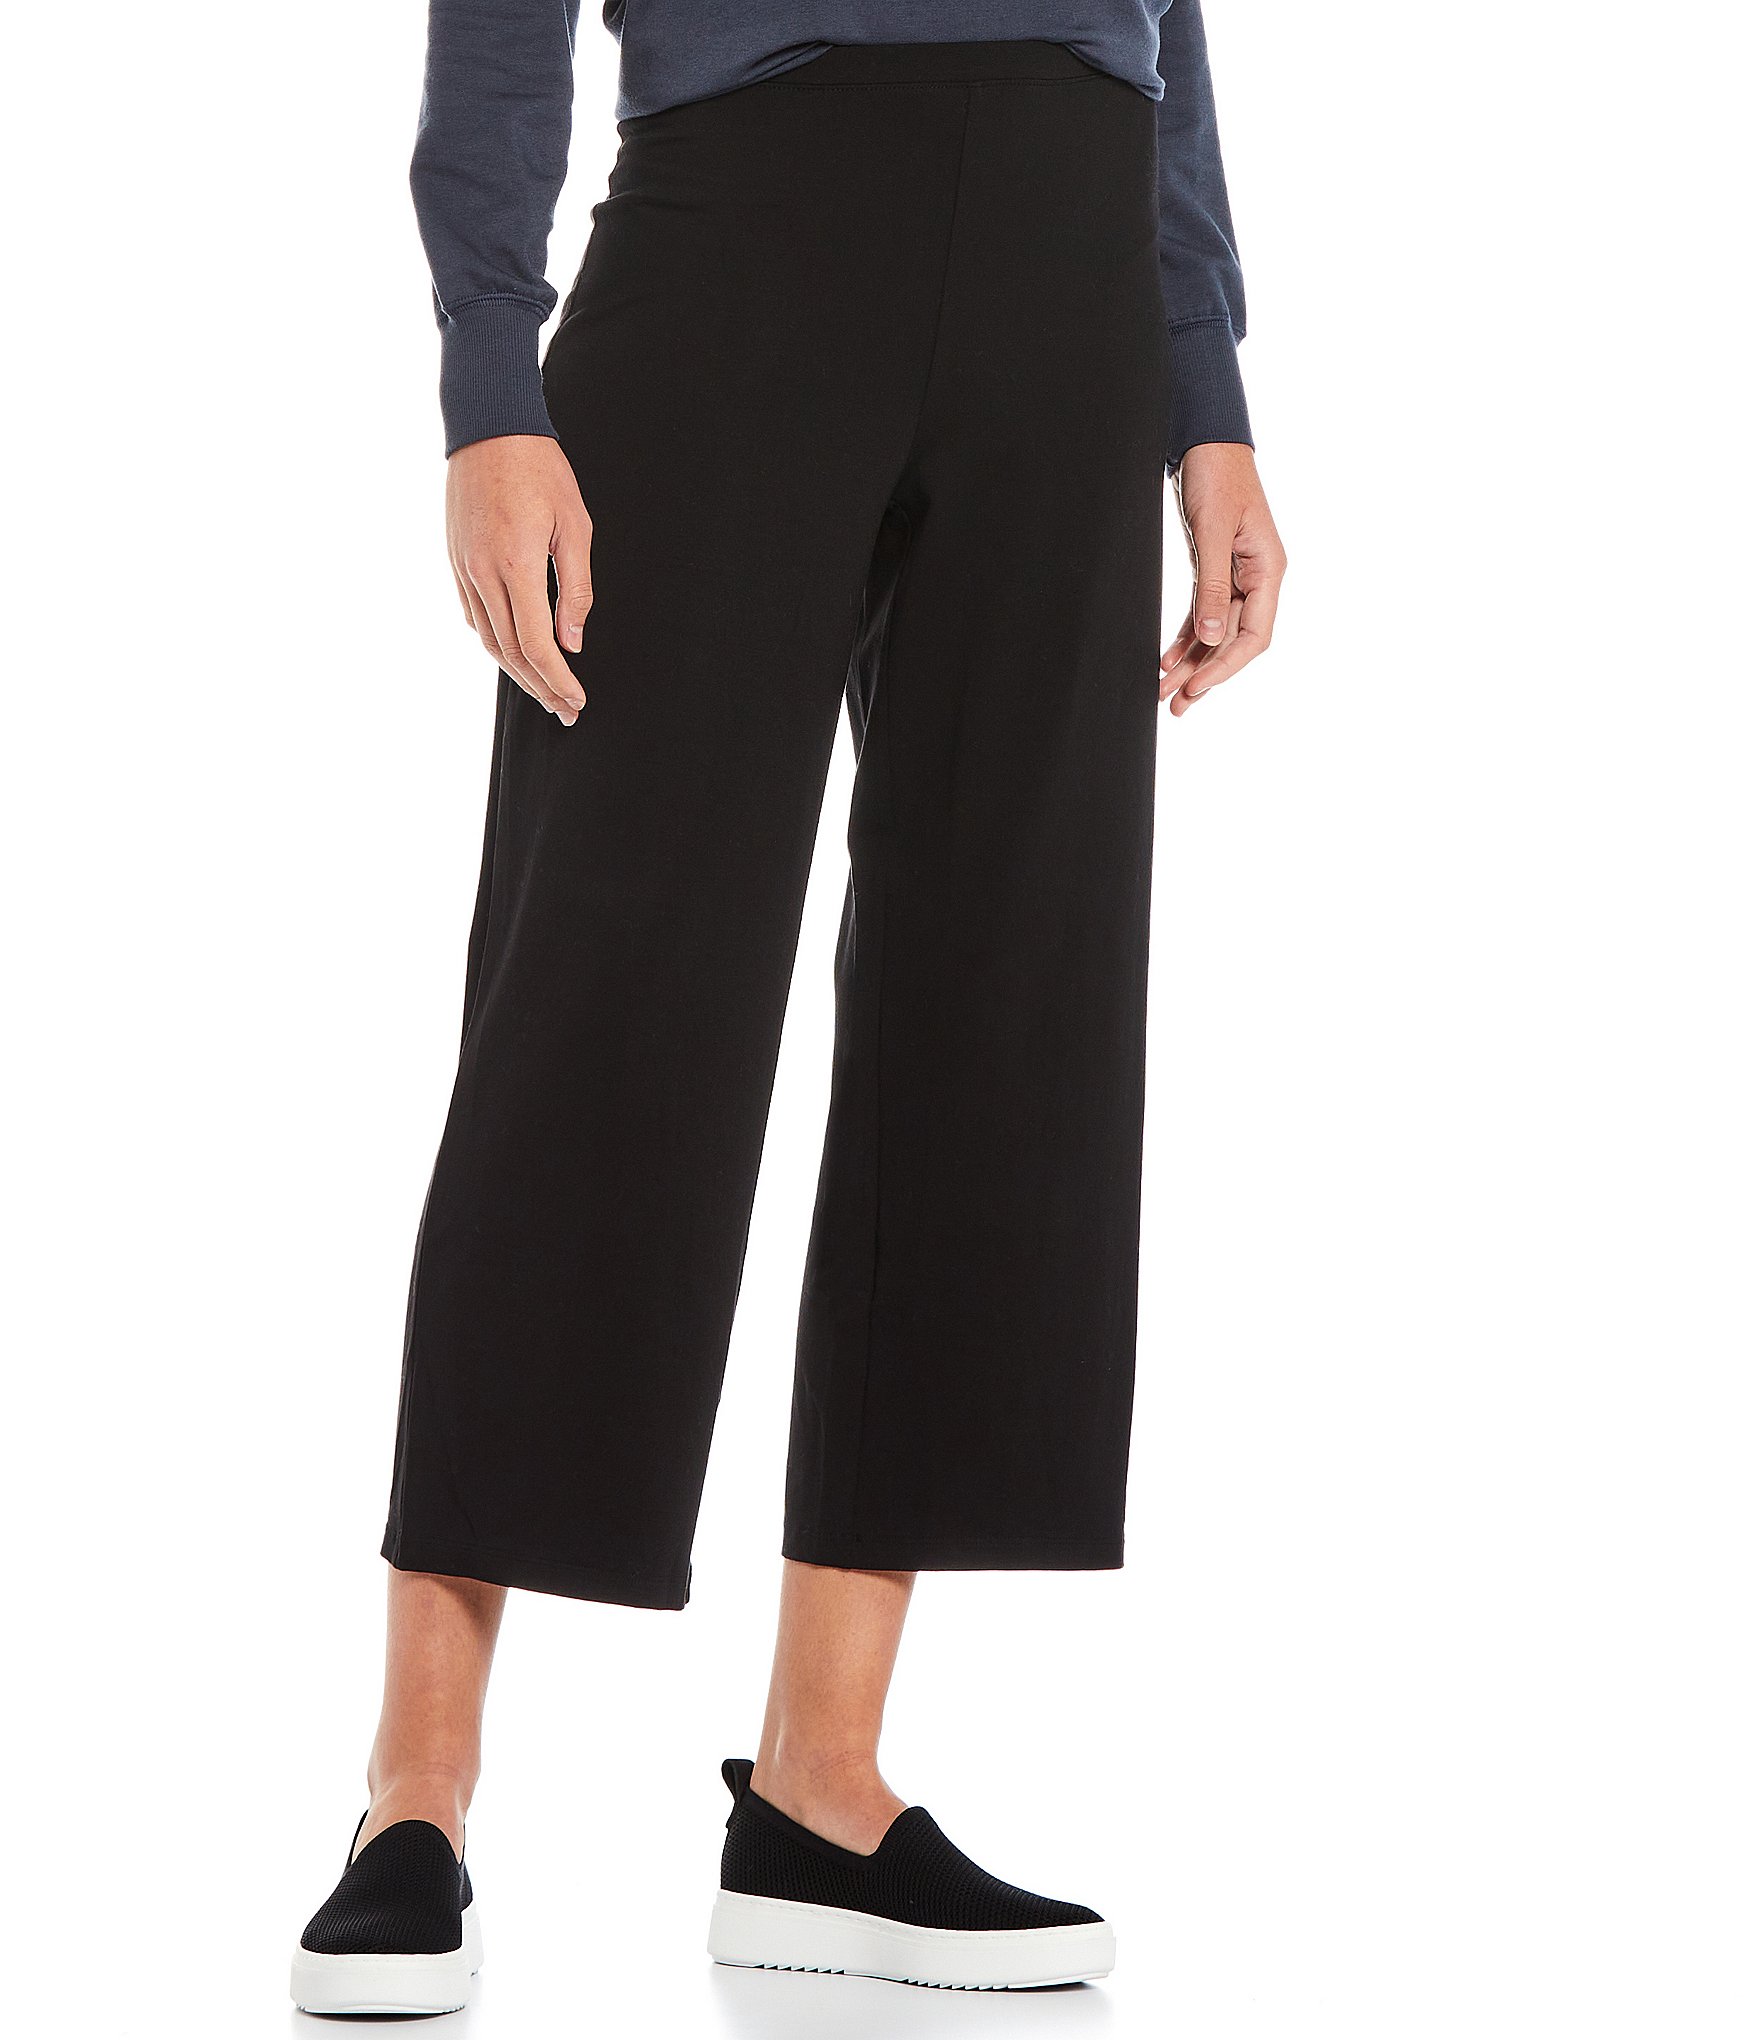 Eileen Fisher Pull On Style Straight Leg Pants STRETCH Gray Black XS